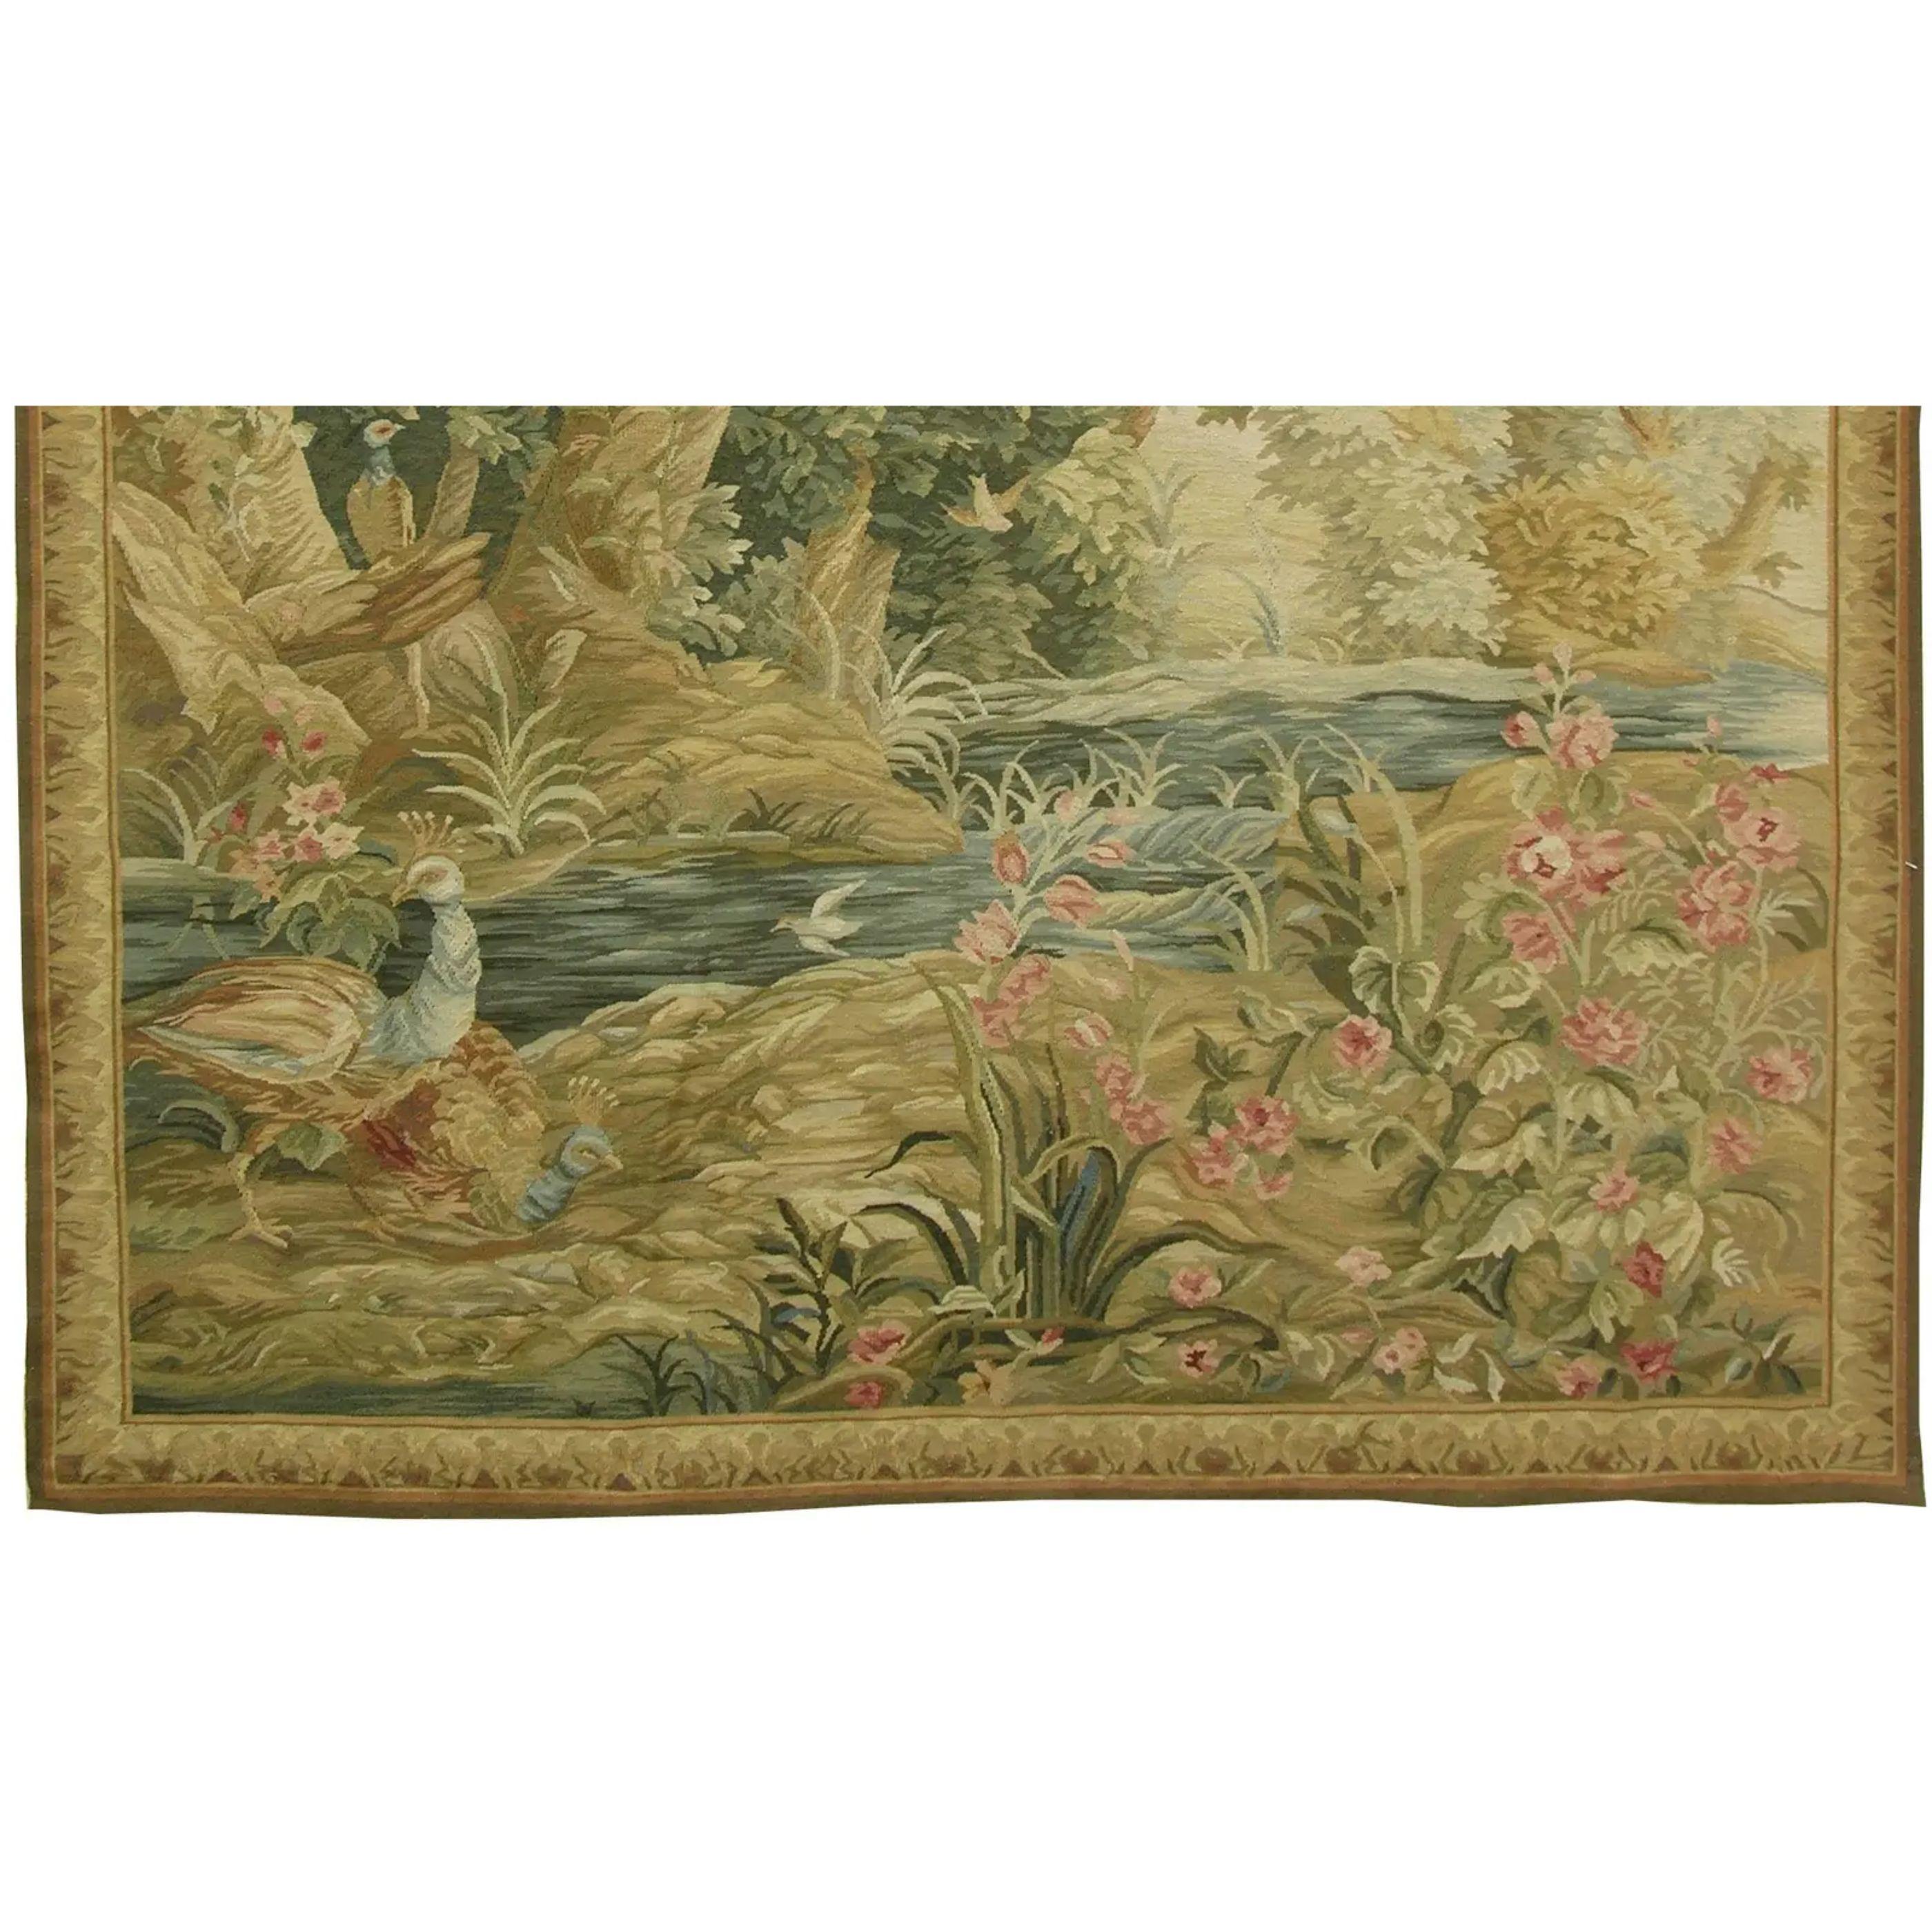 Unknown Vintage Woven Creek Tapestry 6.5X5.33 For Sale